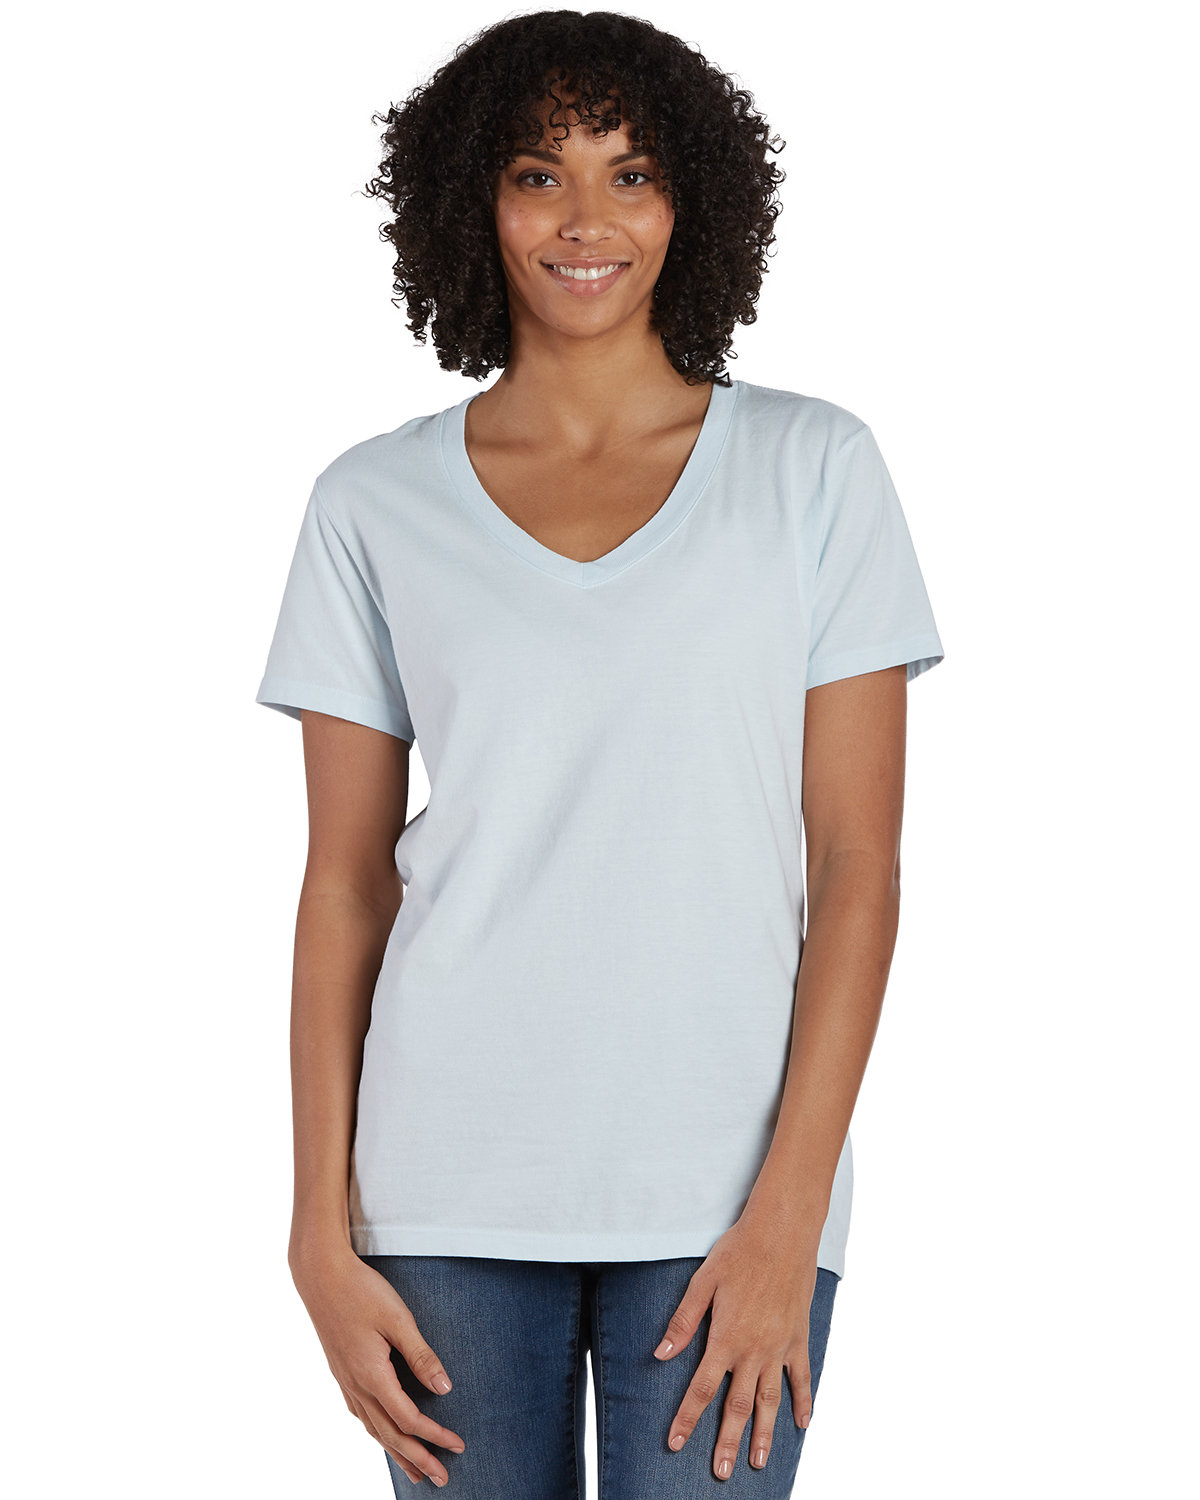 ComfortWash by Hanes Ladies' V-Neck T-Shirt SOOTHING BLUE 